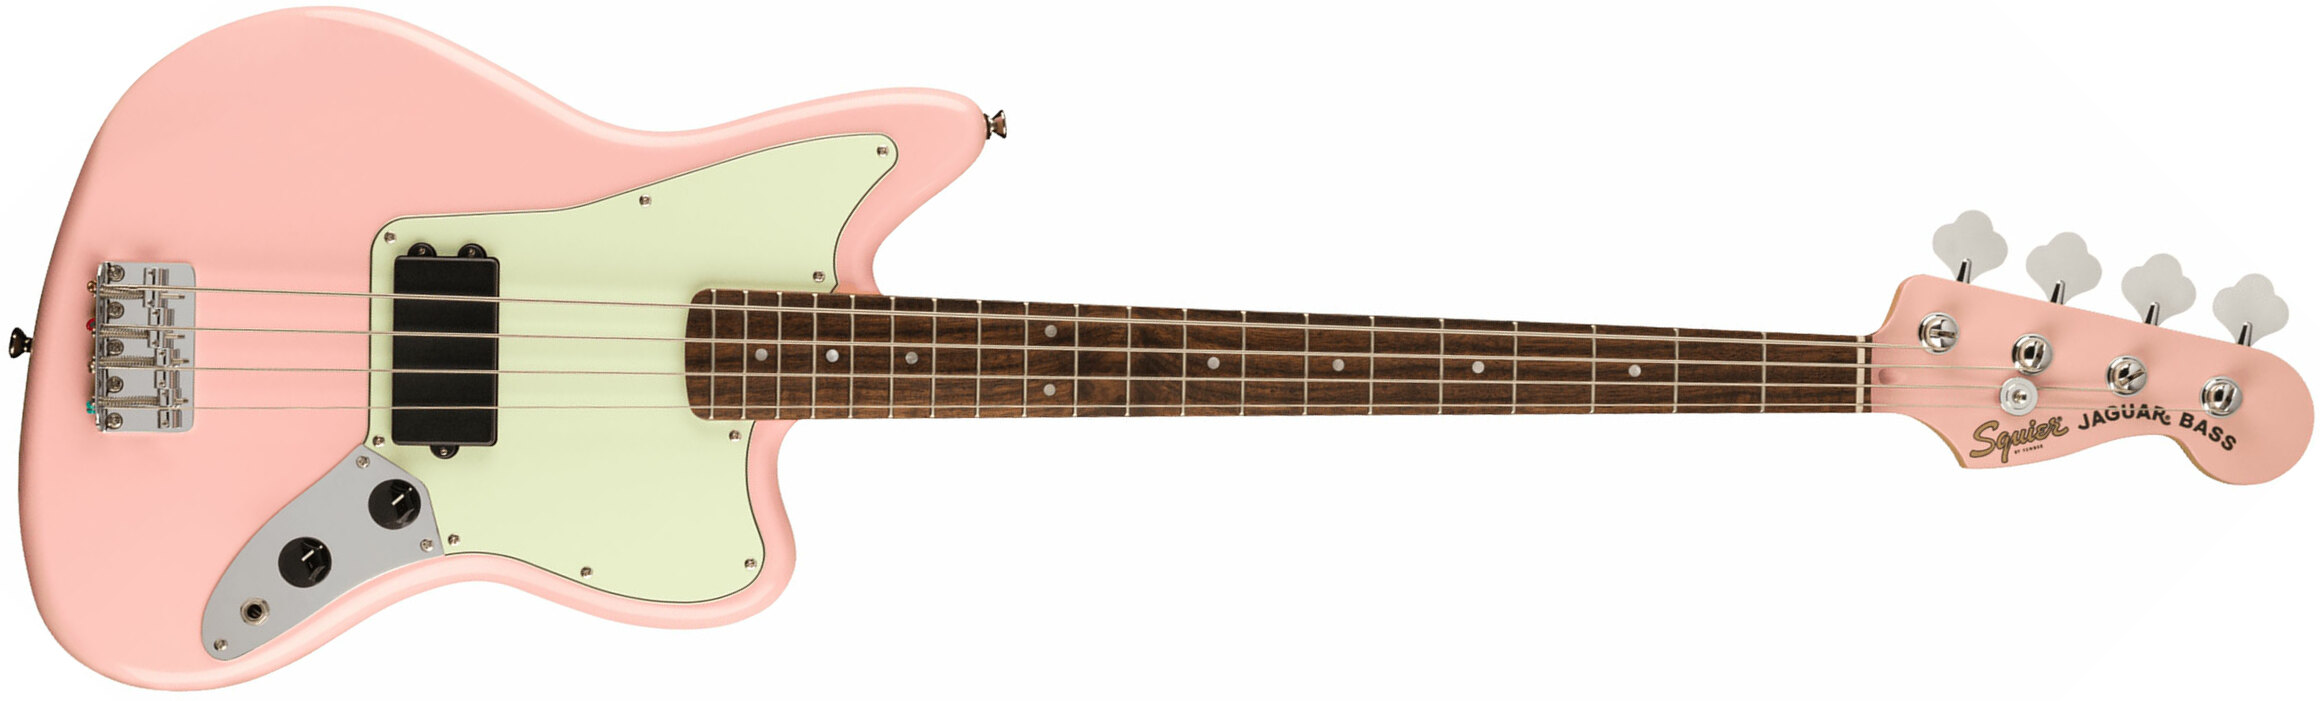 Squier Jaguar Bass H Affinity Fsr Lau - Shell Pink - Solid body electric bass - Main picture